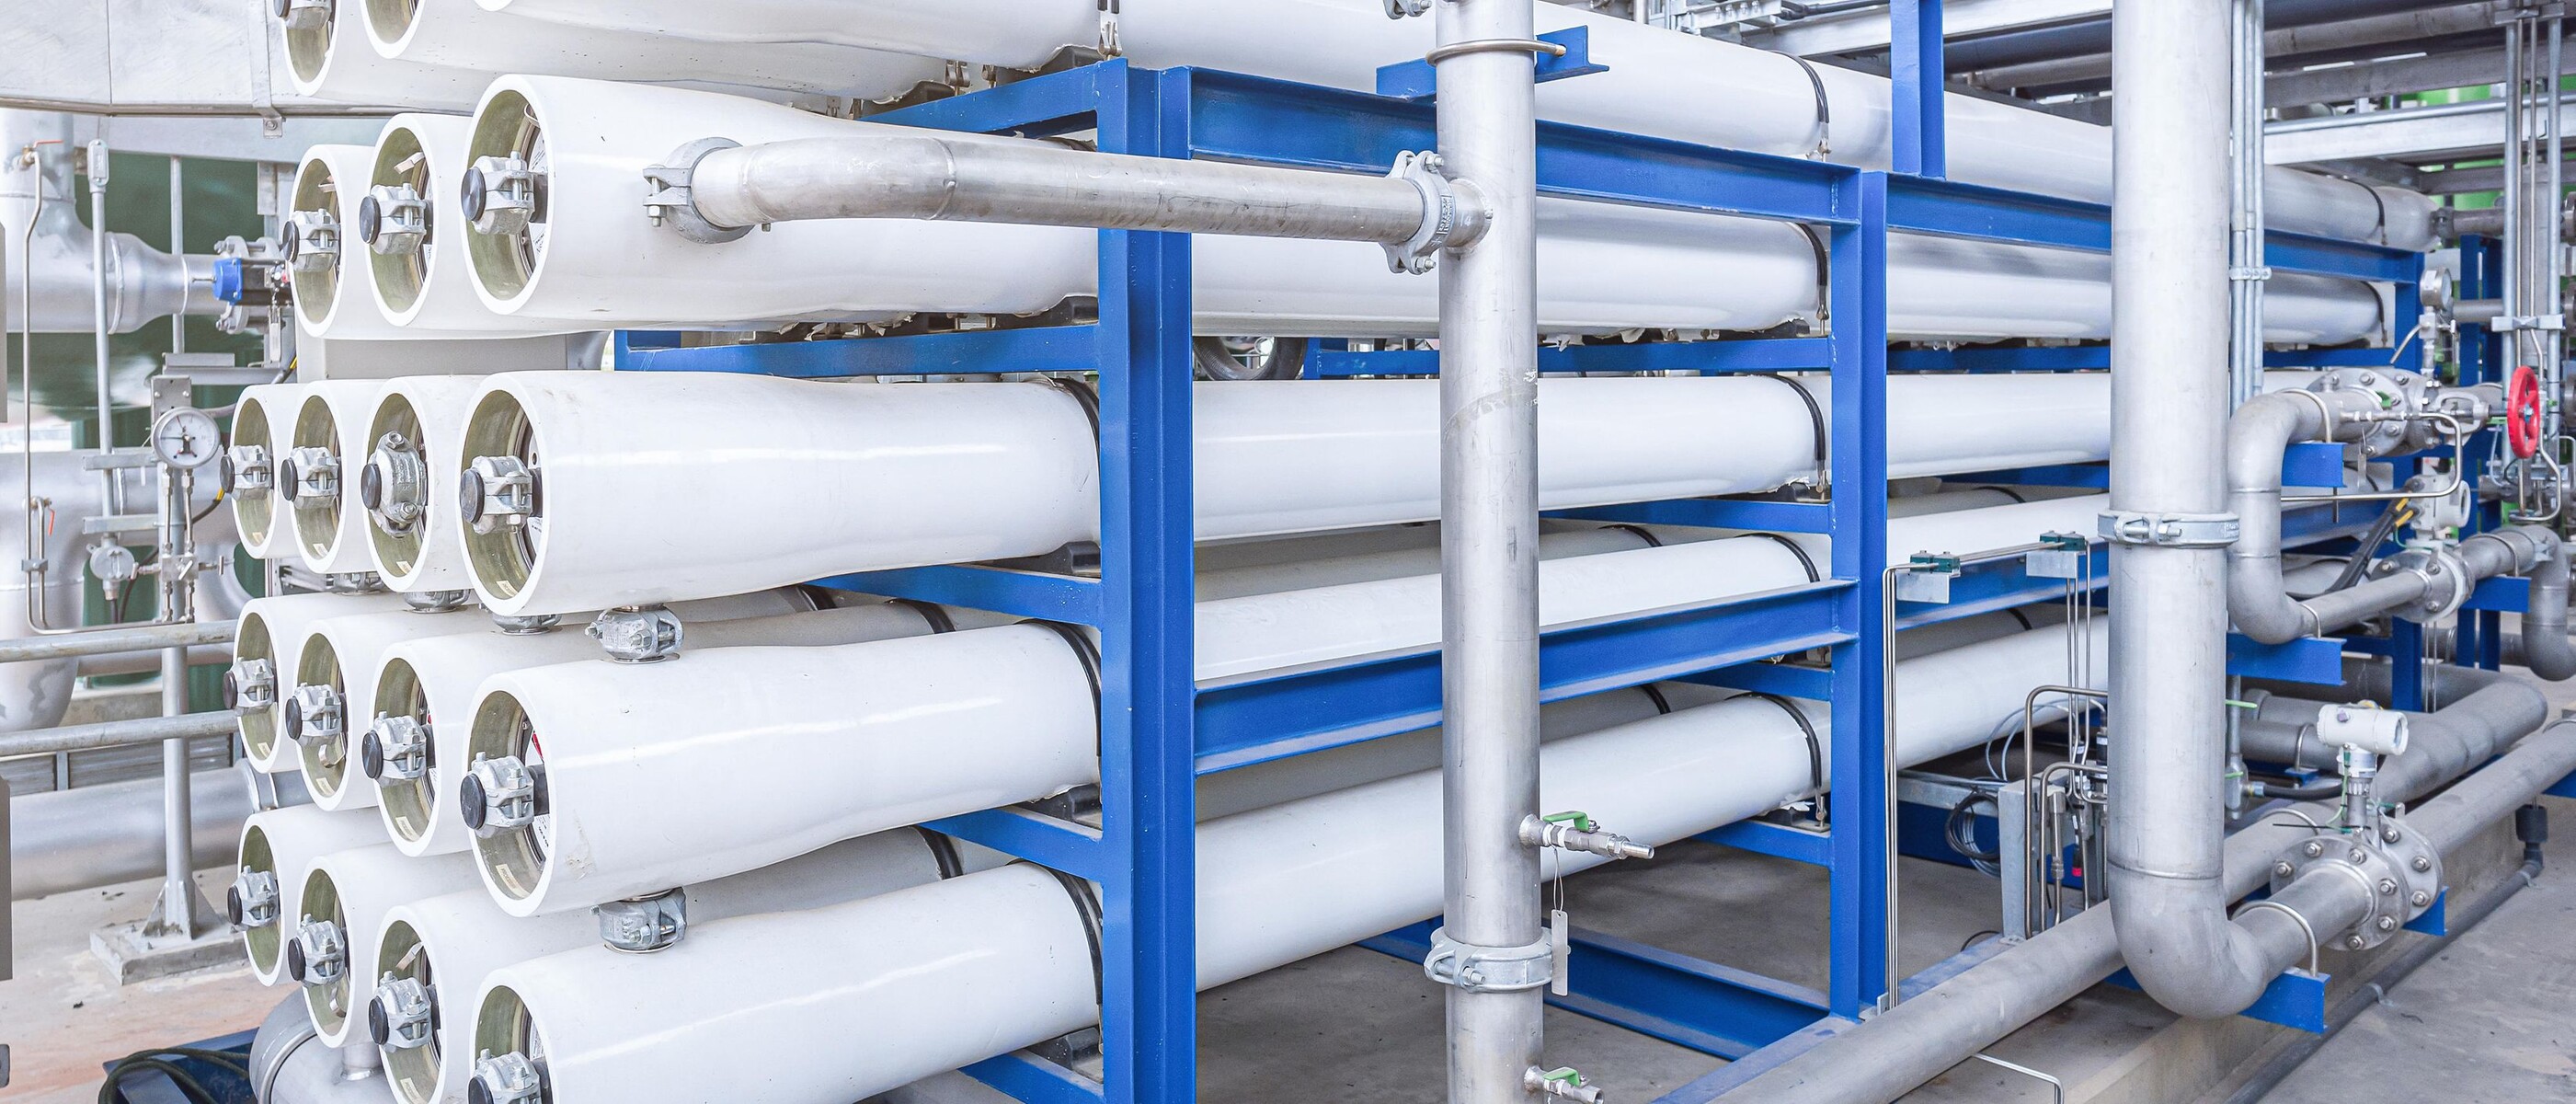 Filtering systems for industrial water treatment